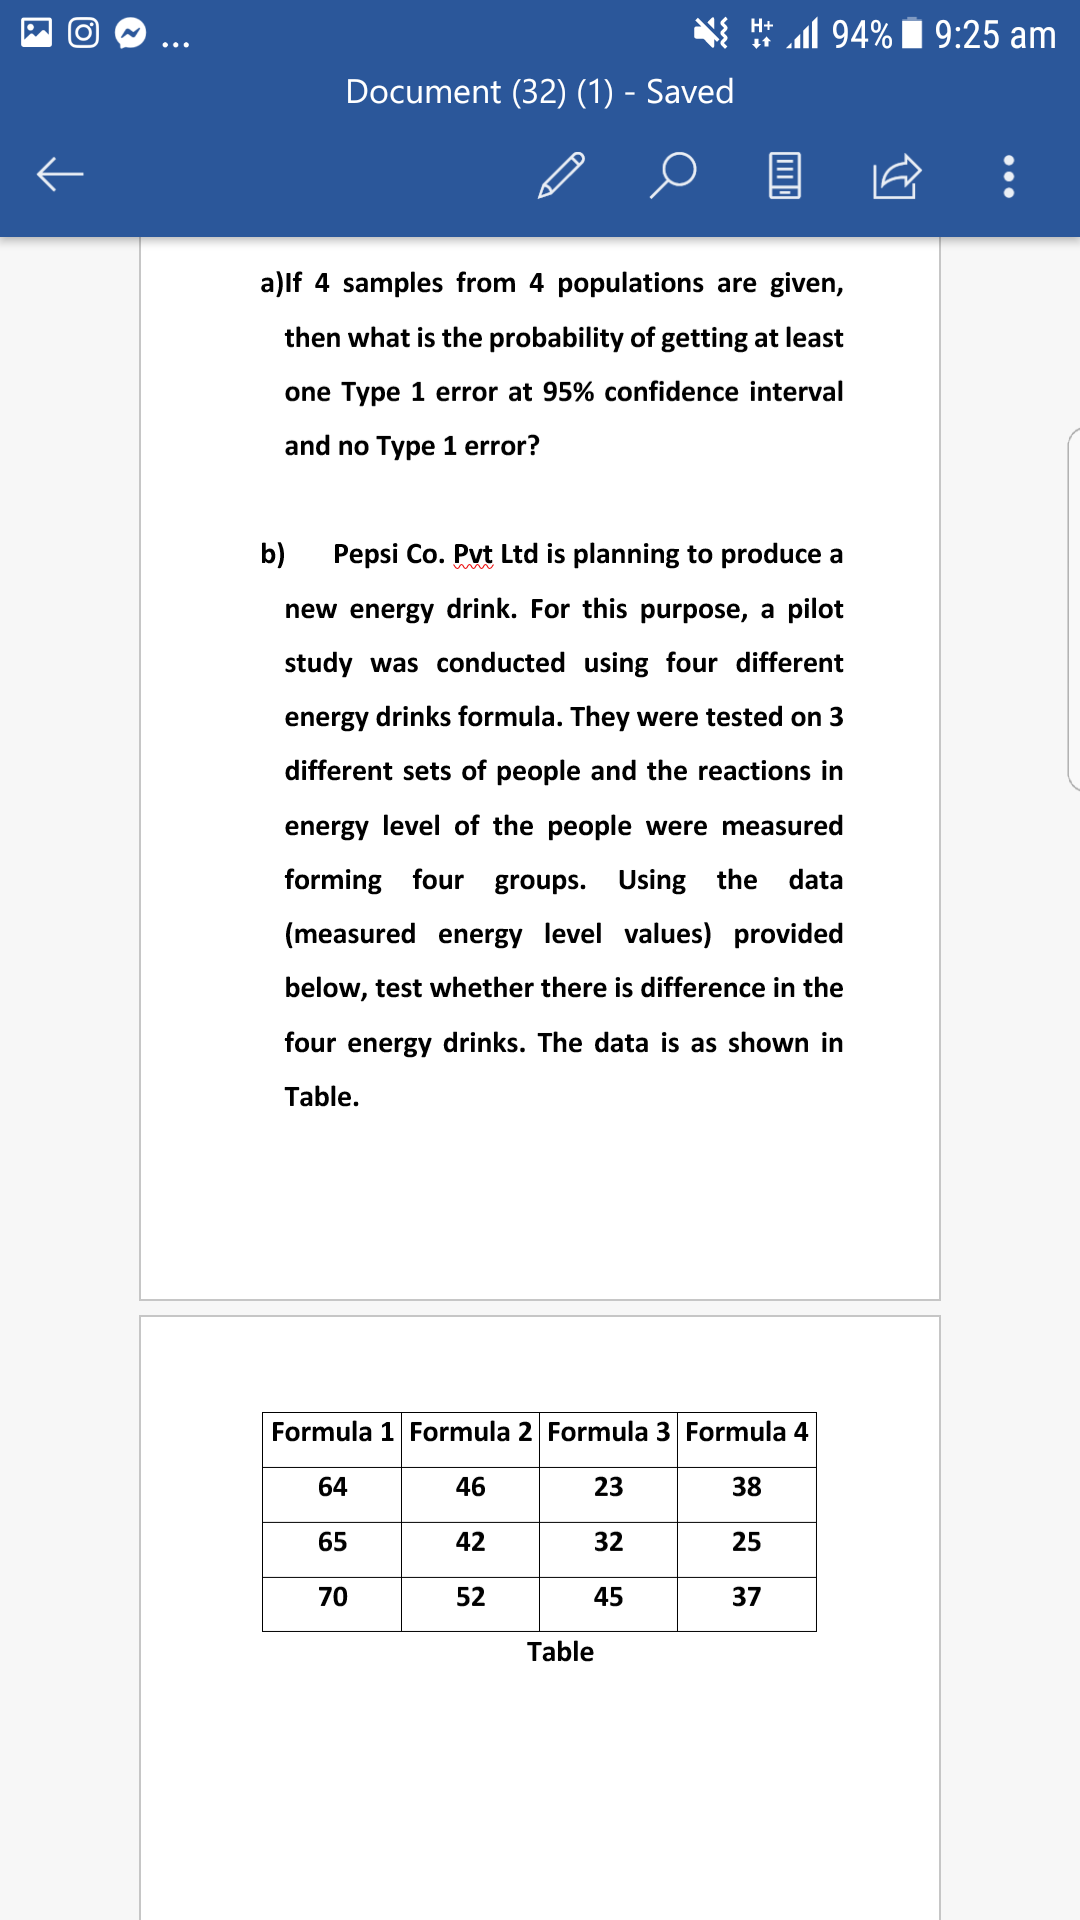 H+ l 94%
9:25 am
Document (32) (1) - Saved
a)lf 4 samples from 4 populations are given,
then what is the probability of getting at least
one Type 1 error at 95% confidence interval
and no Type 1 error?
b)
Pepsi Co. Pvt Ltd is planning to produce a
new energy drink. For this purpose, a pilot
study was conducted using four different
energy drinks formula. They were tested on 3
different sets of people and the reactions in
energy level of the people were measured
forming four groups.
Using the data
(measured energy level values) provided
below, test whether there is difference in the
four energy drinks. The data is as shown in
Table.
Formula 1 Formula 2 Formula 3 Formula 4
64
46
23
38
65
42
32
25
70
52
45
37
Table
